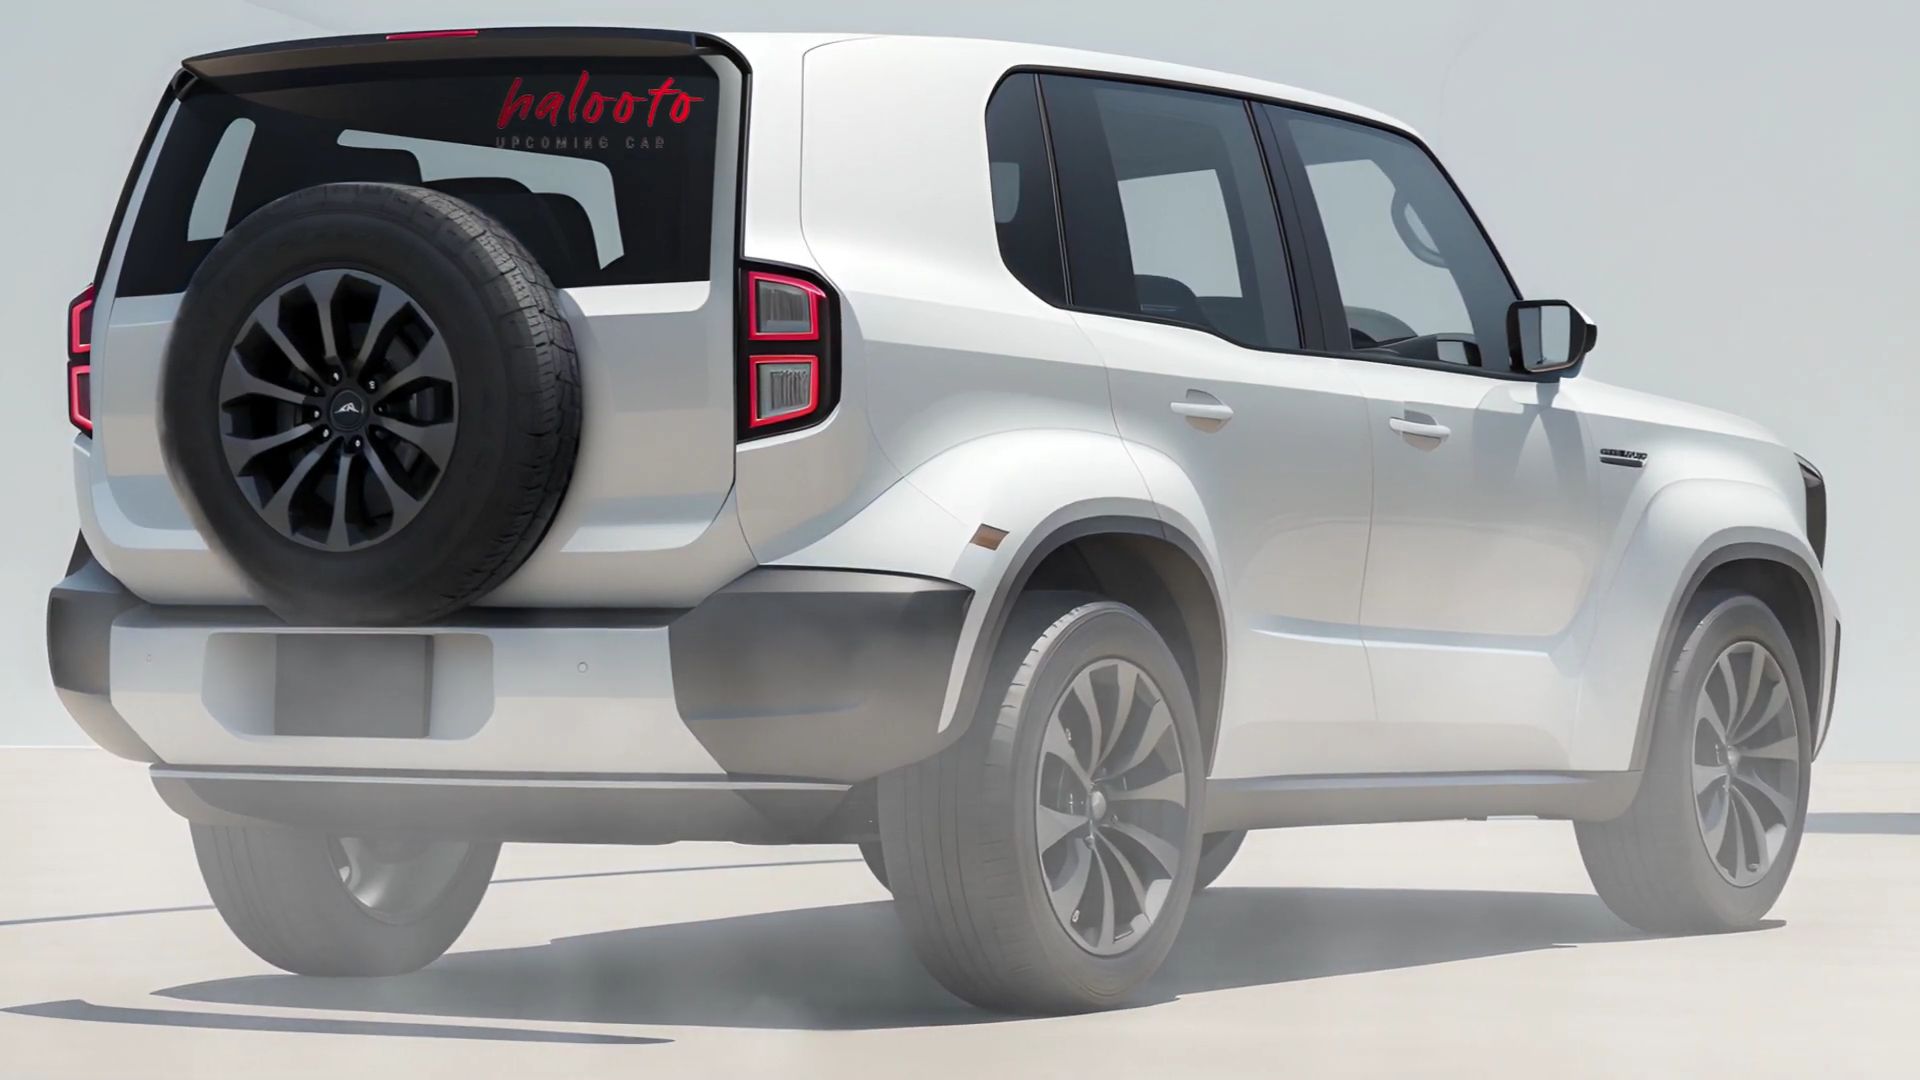 body-on-frame-toyota-land-cruiser-mini-allegedly-launching-2024-with-compact-footprint-2.jpg